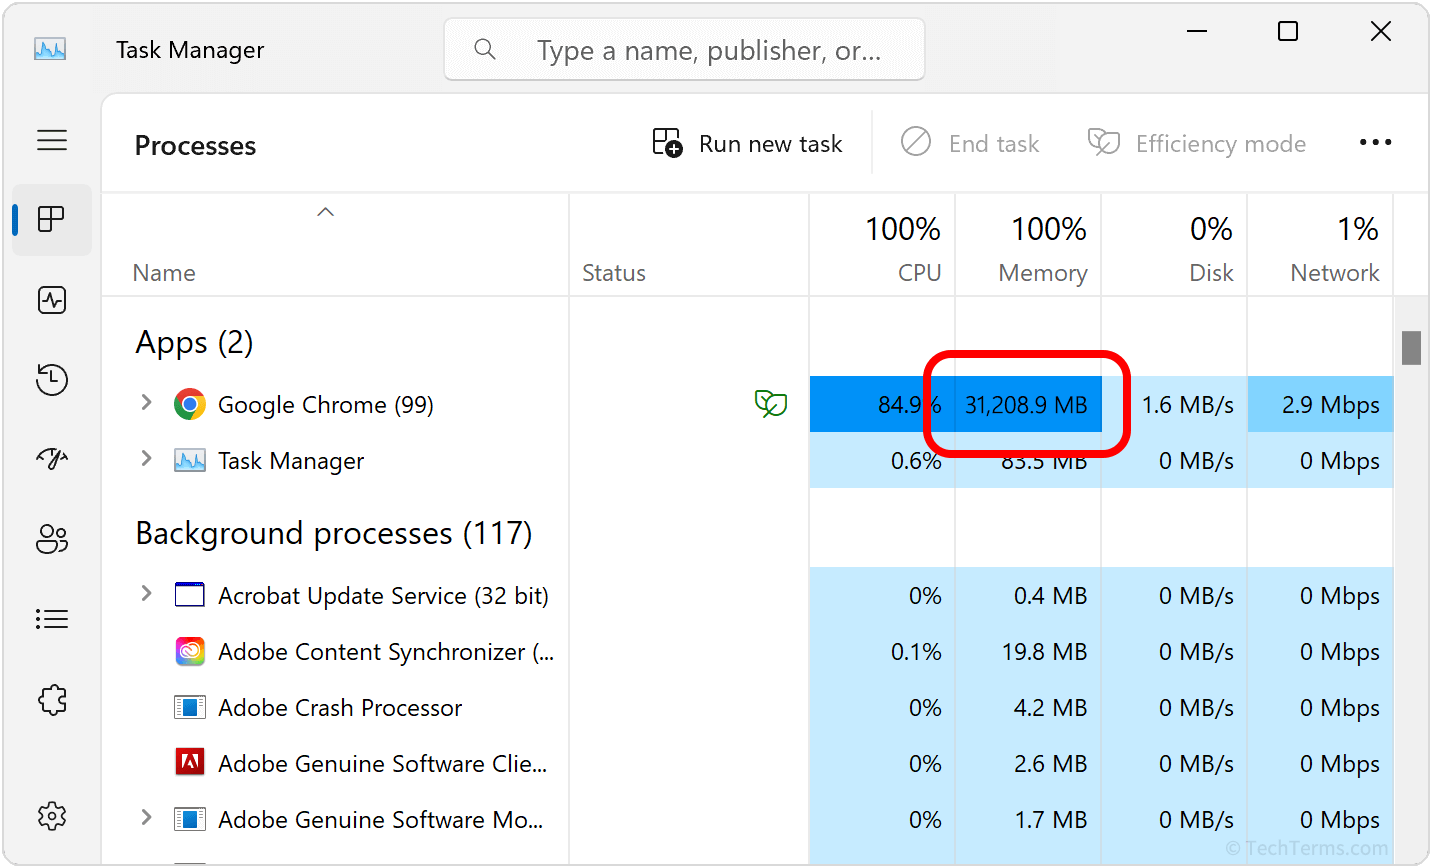 You can identify which app is causing a memory leak by looking at memory usage in the task manager